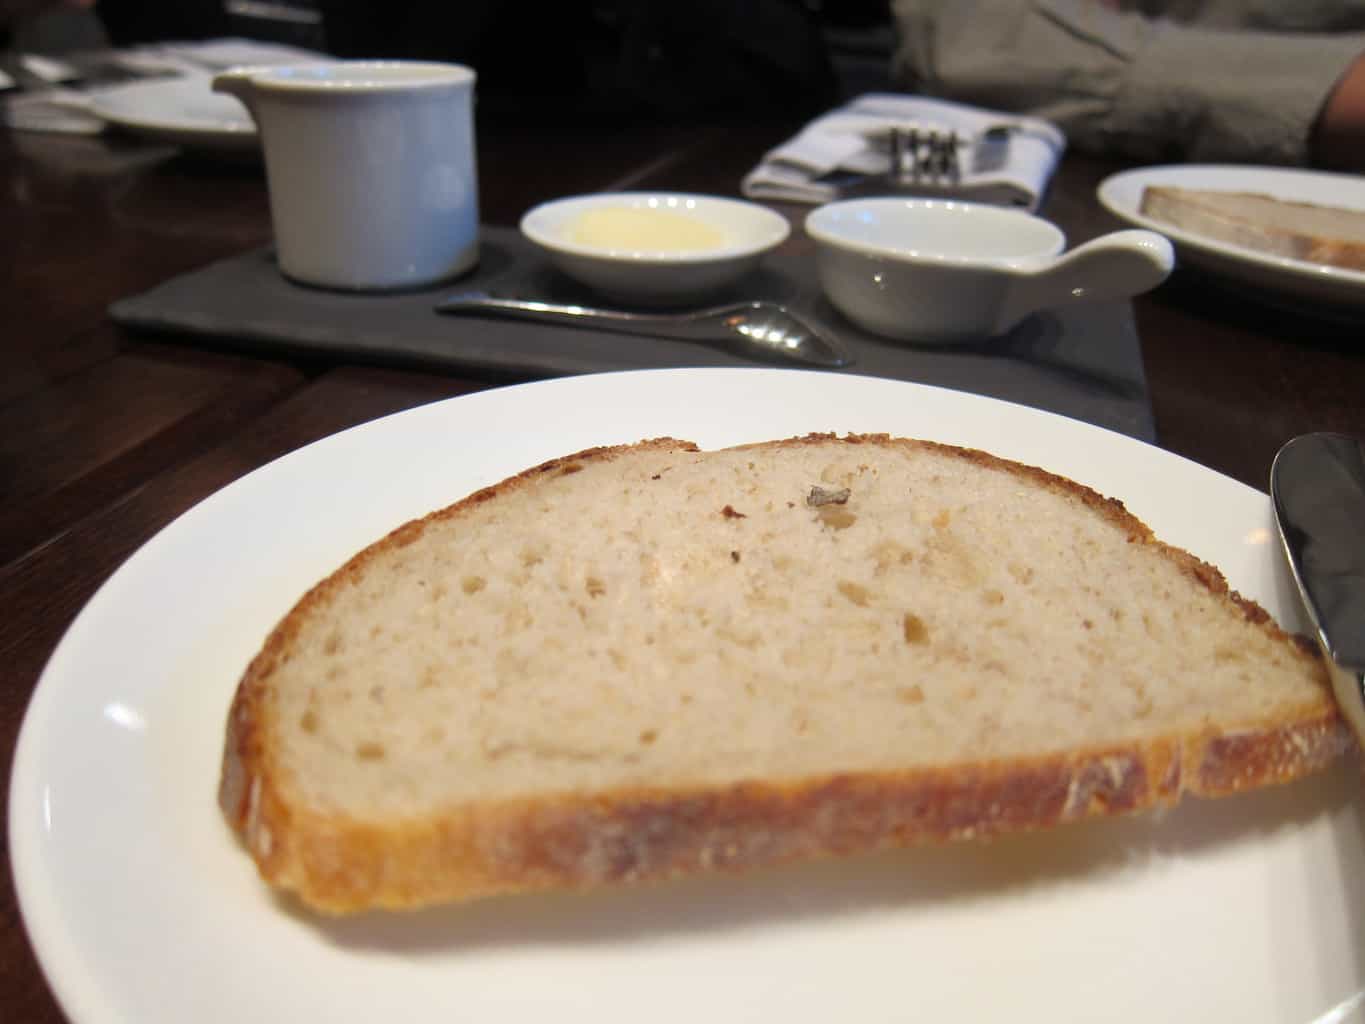 bread served before meal